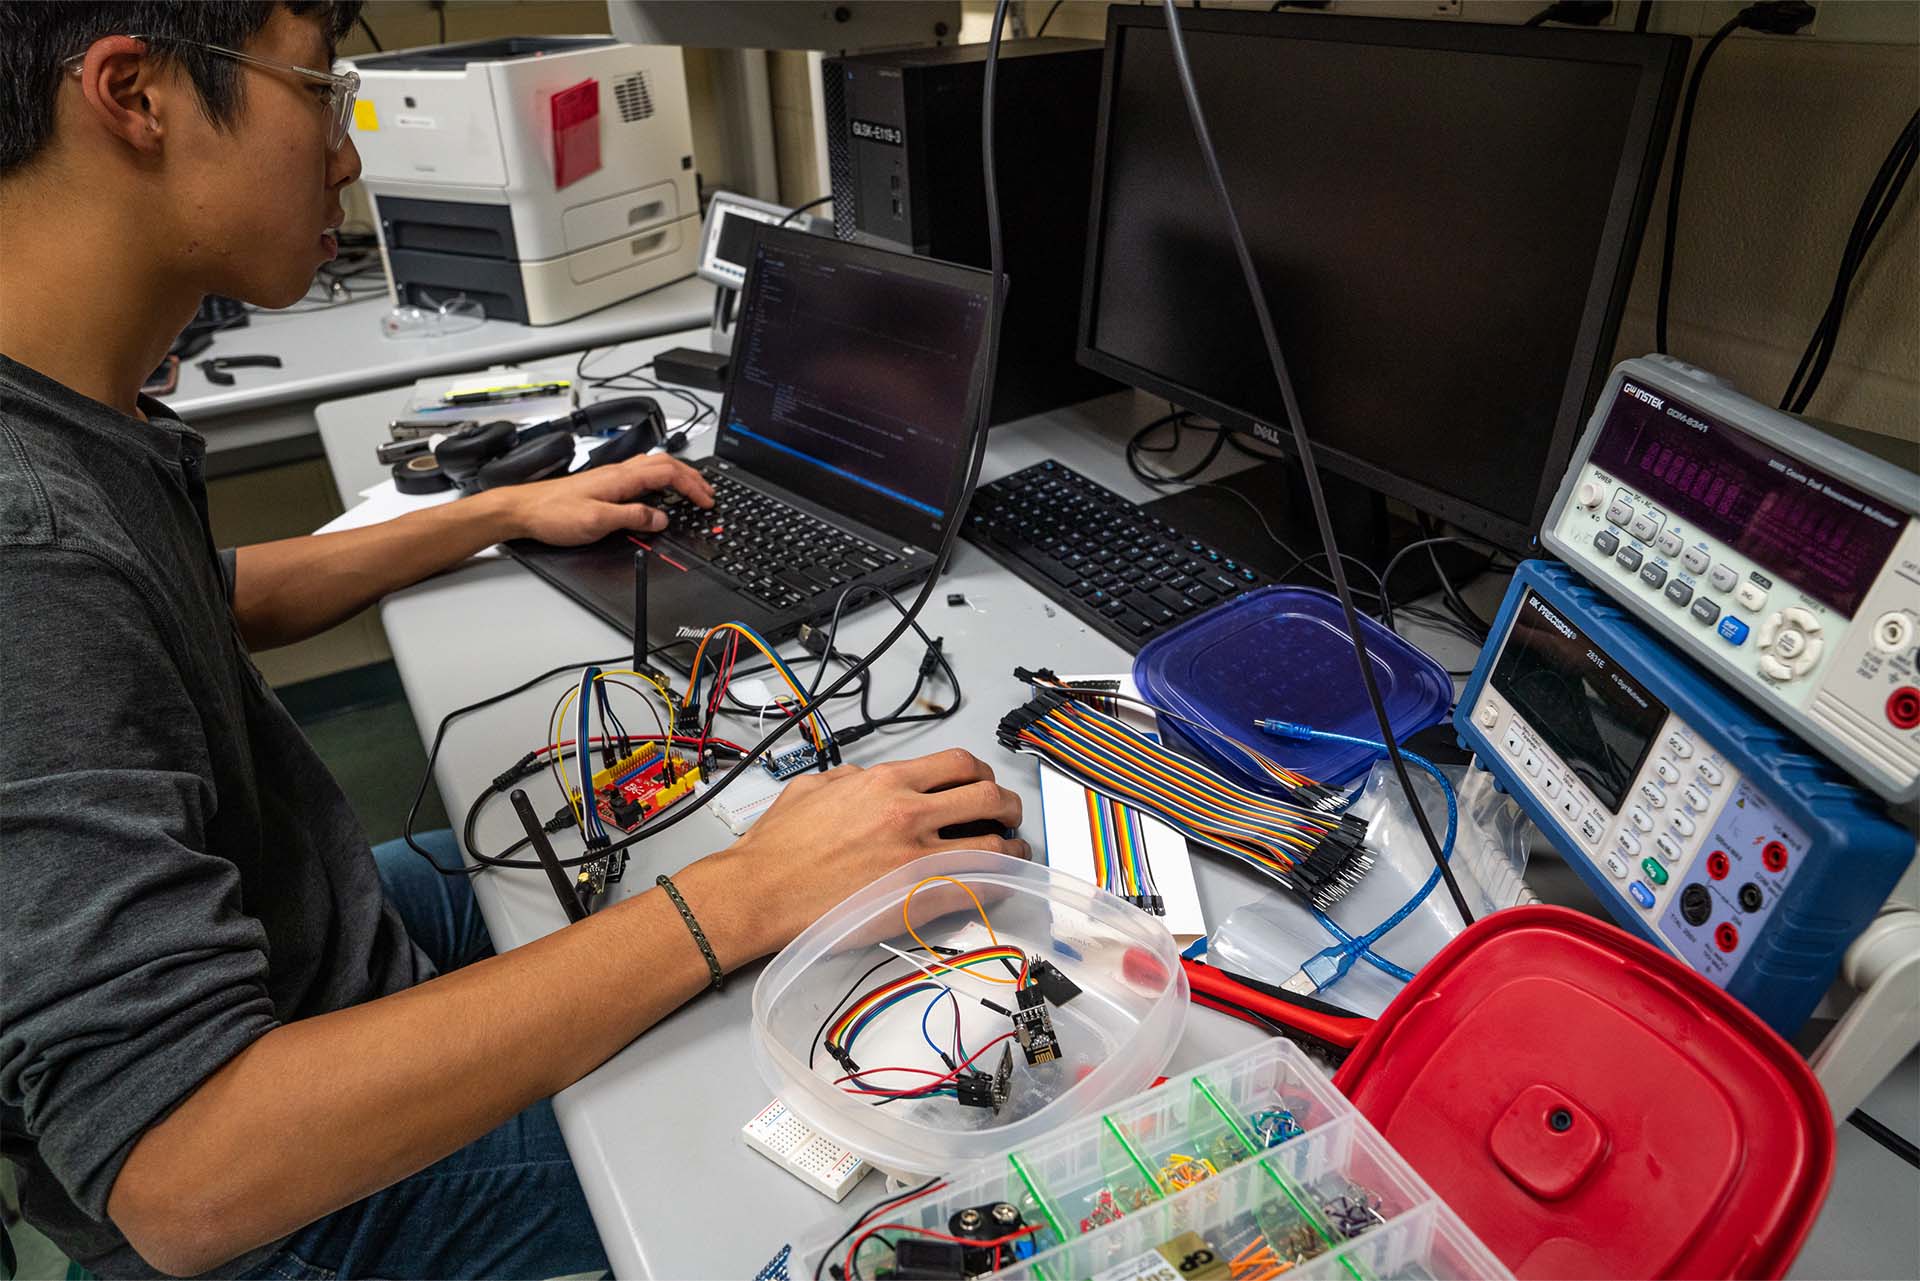 Students working in the Microcomputer Design Lab